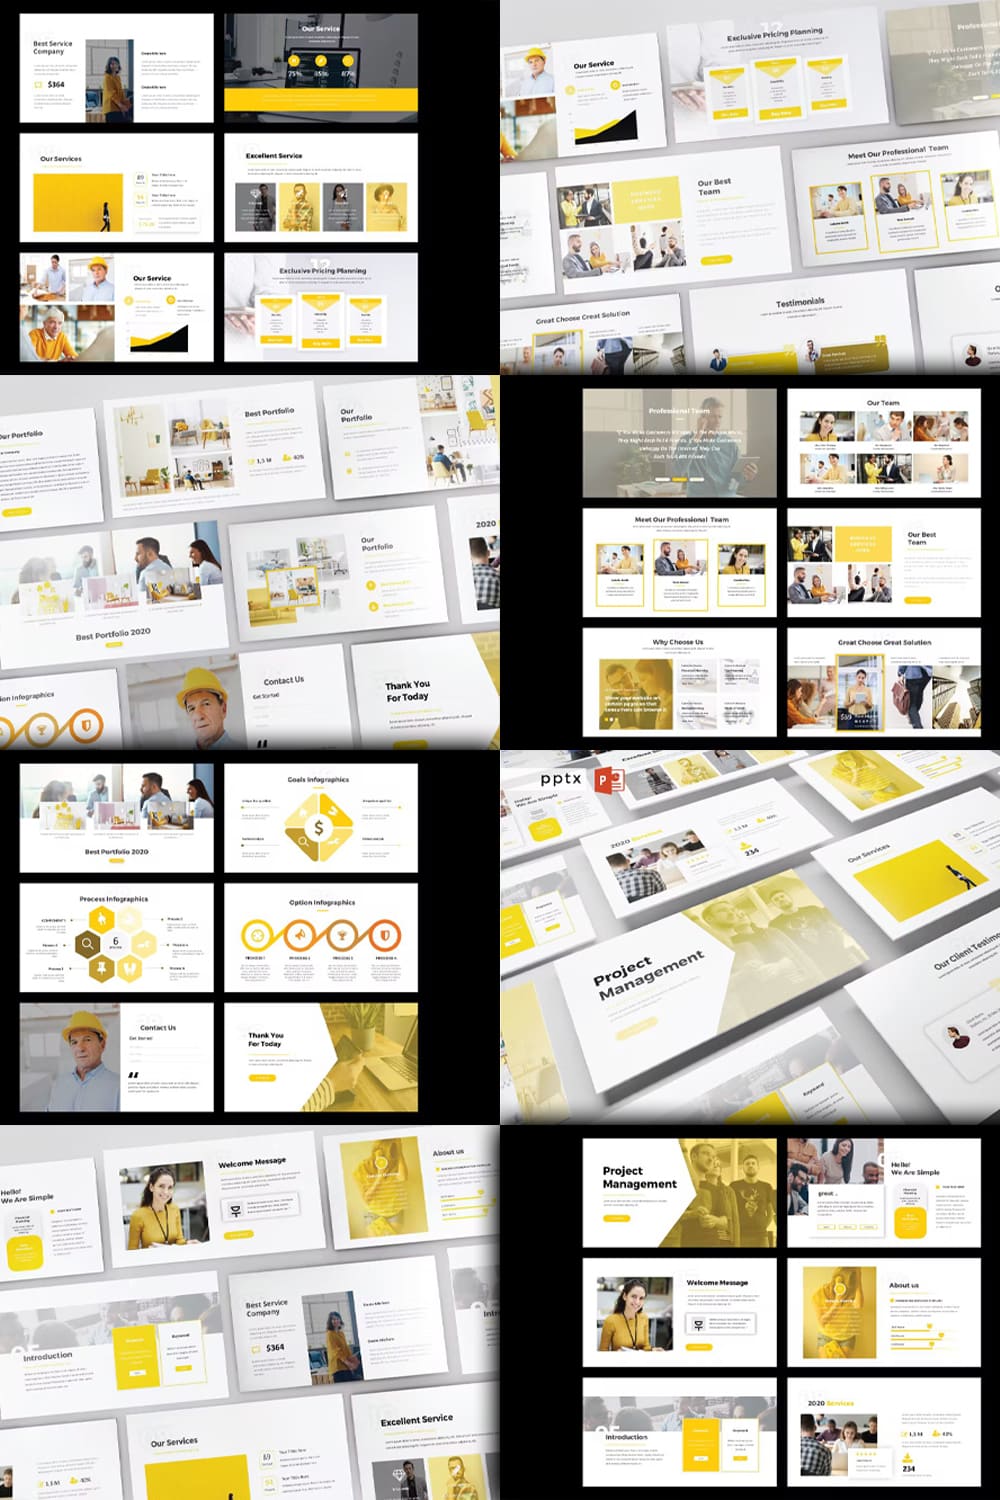 Project management powerpoint - pinterest image preview.